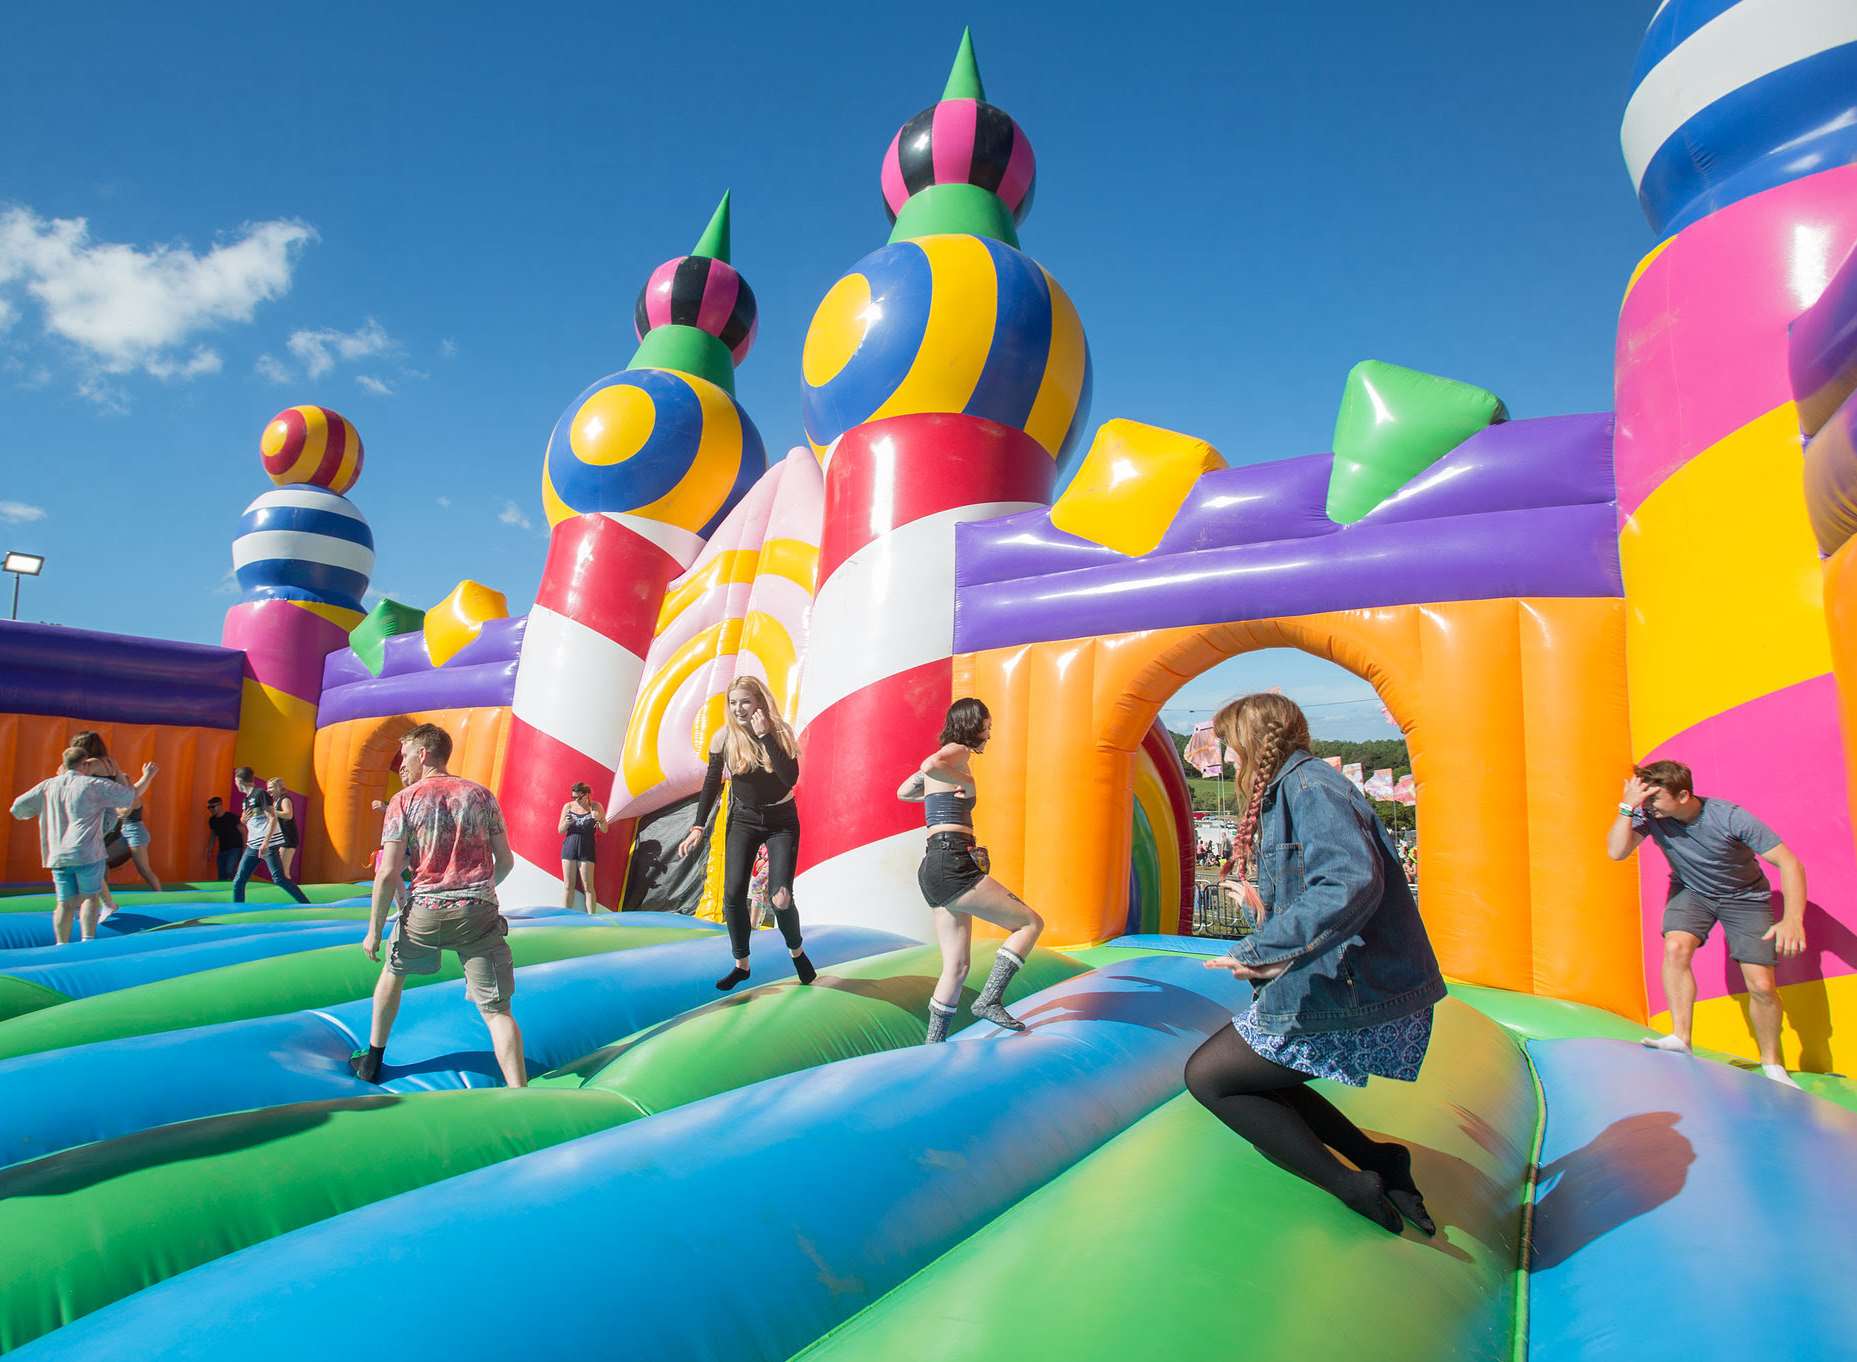 The world's biggest bouncy castle is coming to Dreamland